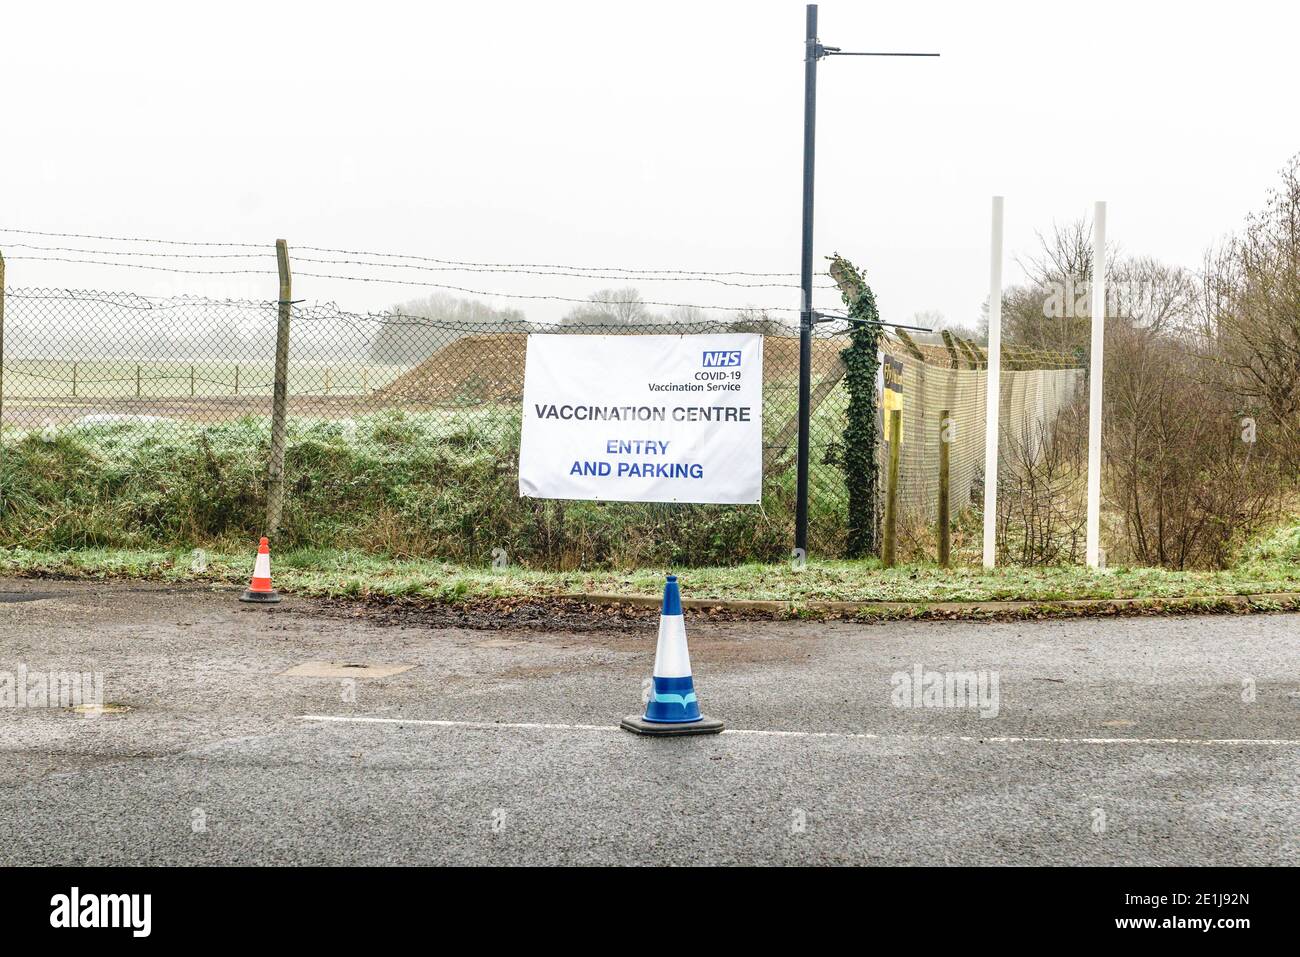 Bicester, Oxfordshire, UK. 7th January, 2020.  The Oxford Astra Zeneca vaccine has been rolled out today to hundreds of sites in England, with Bicester Heritage opening up as a covid vaccination centre for the Bicester area.  Bridget Catterall/Alamy Live News Stock Photo